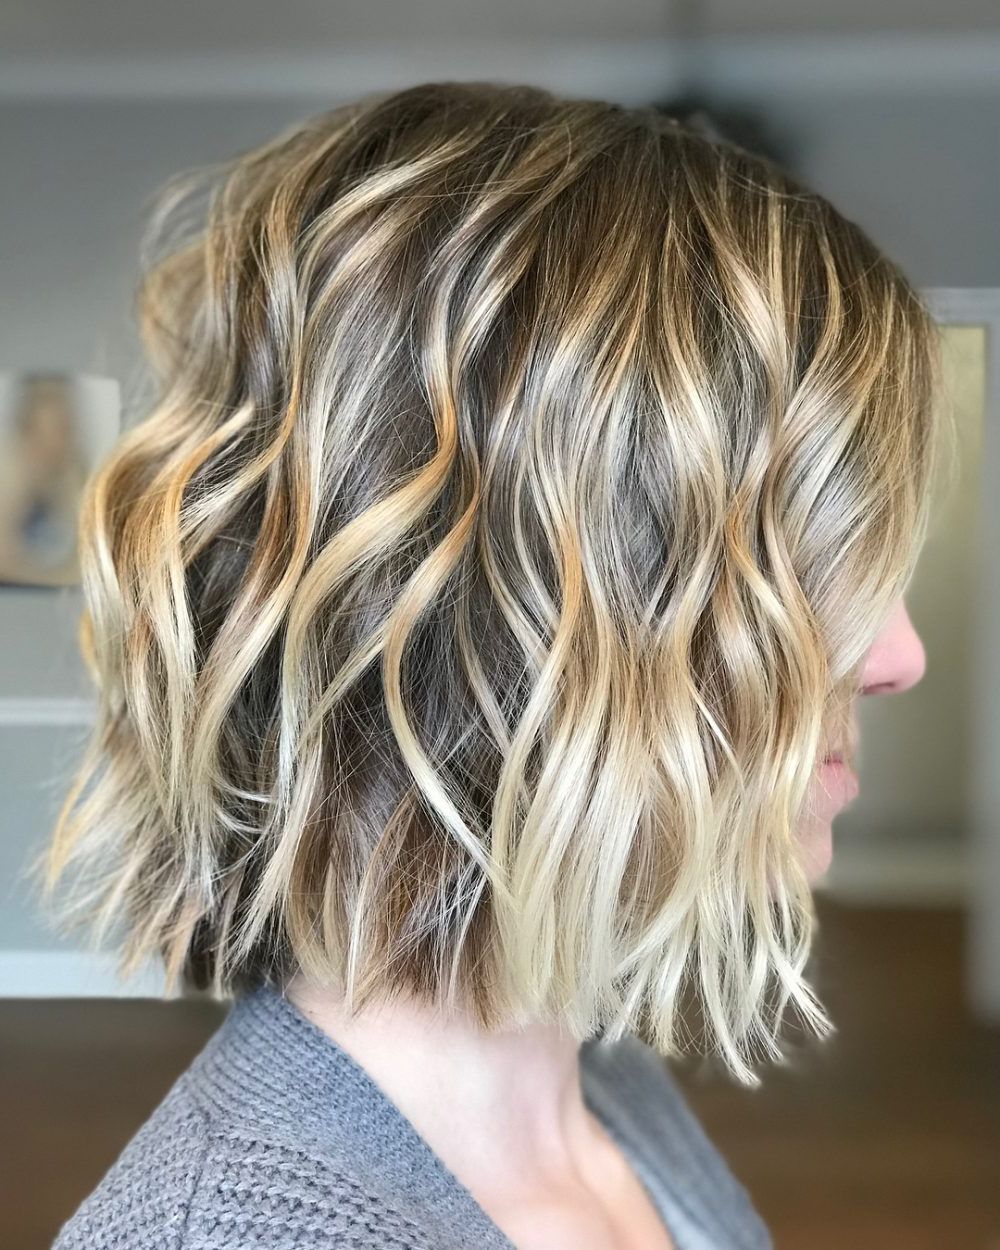 Top 22 Choppy Hairstyles You'll See In 2019 Inside Most Up To Date Long Wavy Chopped Hairstyles (View 6 of 20)